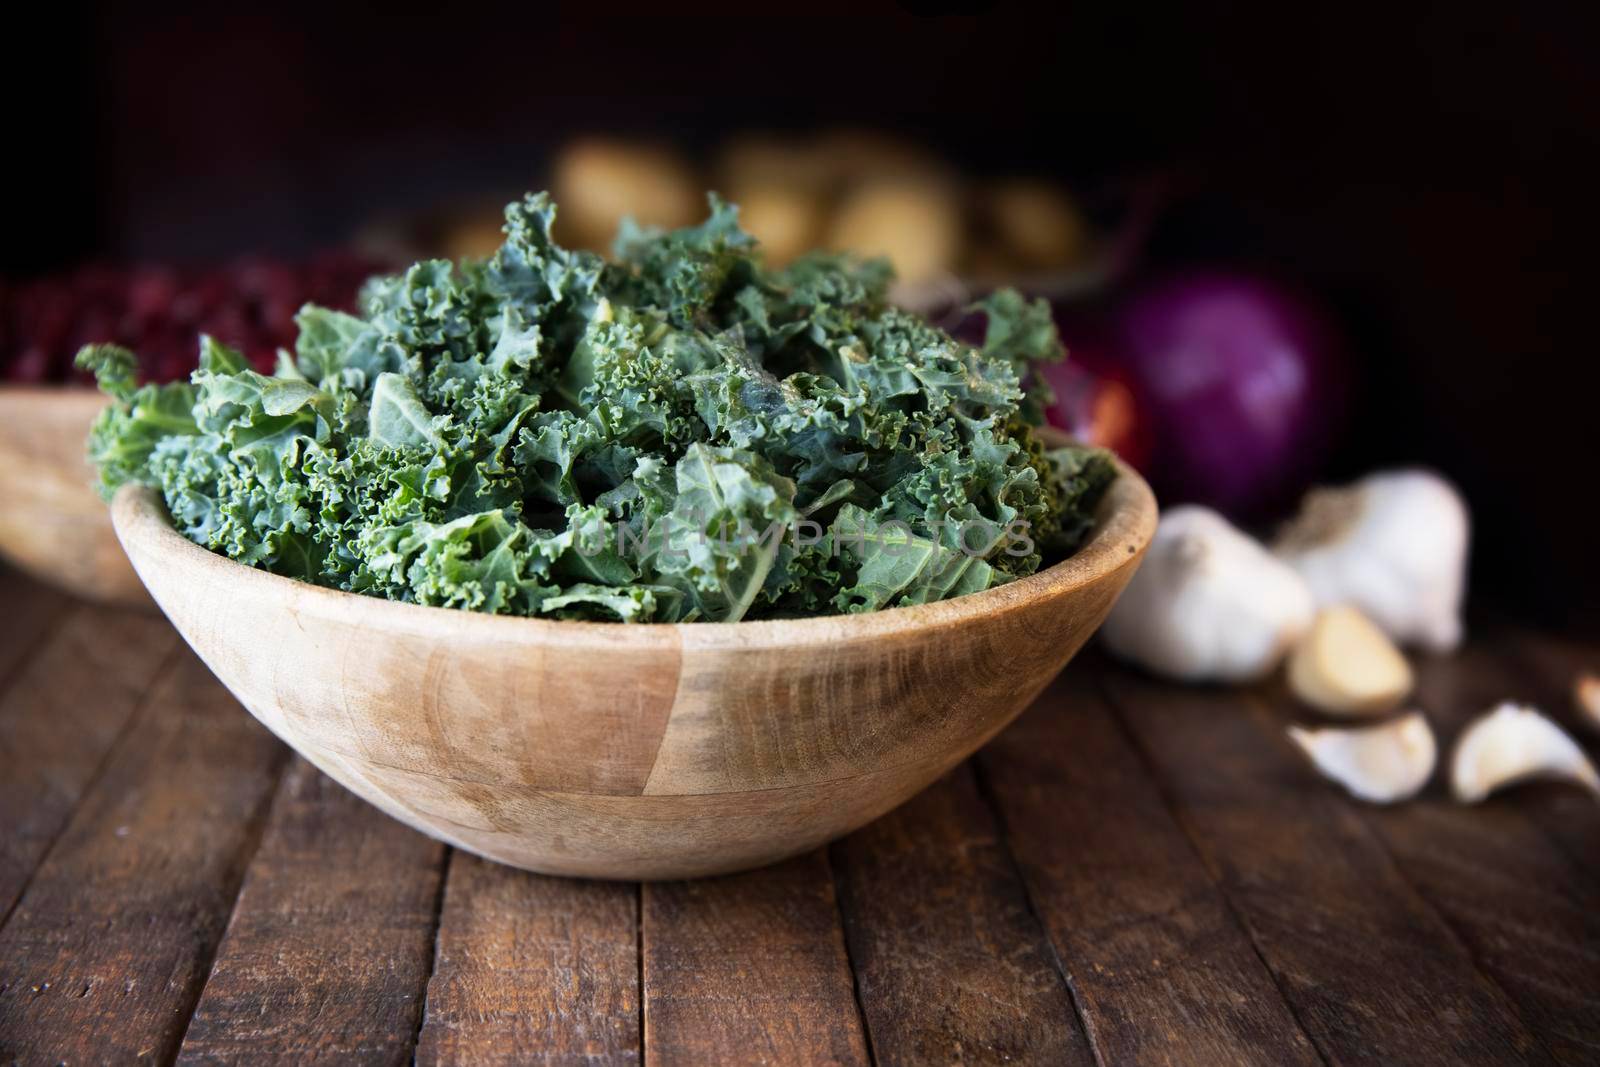 Fresh chopped kale in wooden bowls with garlic and other ingredients in the background